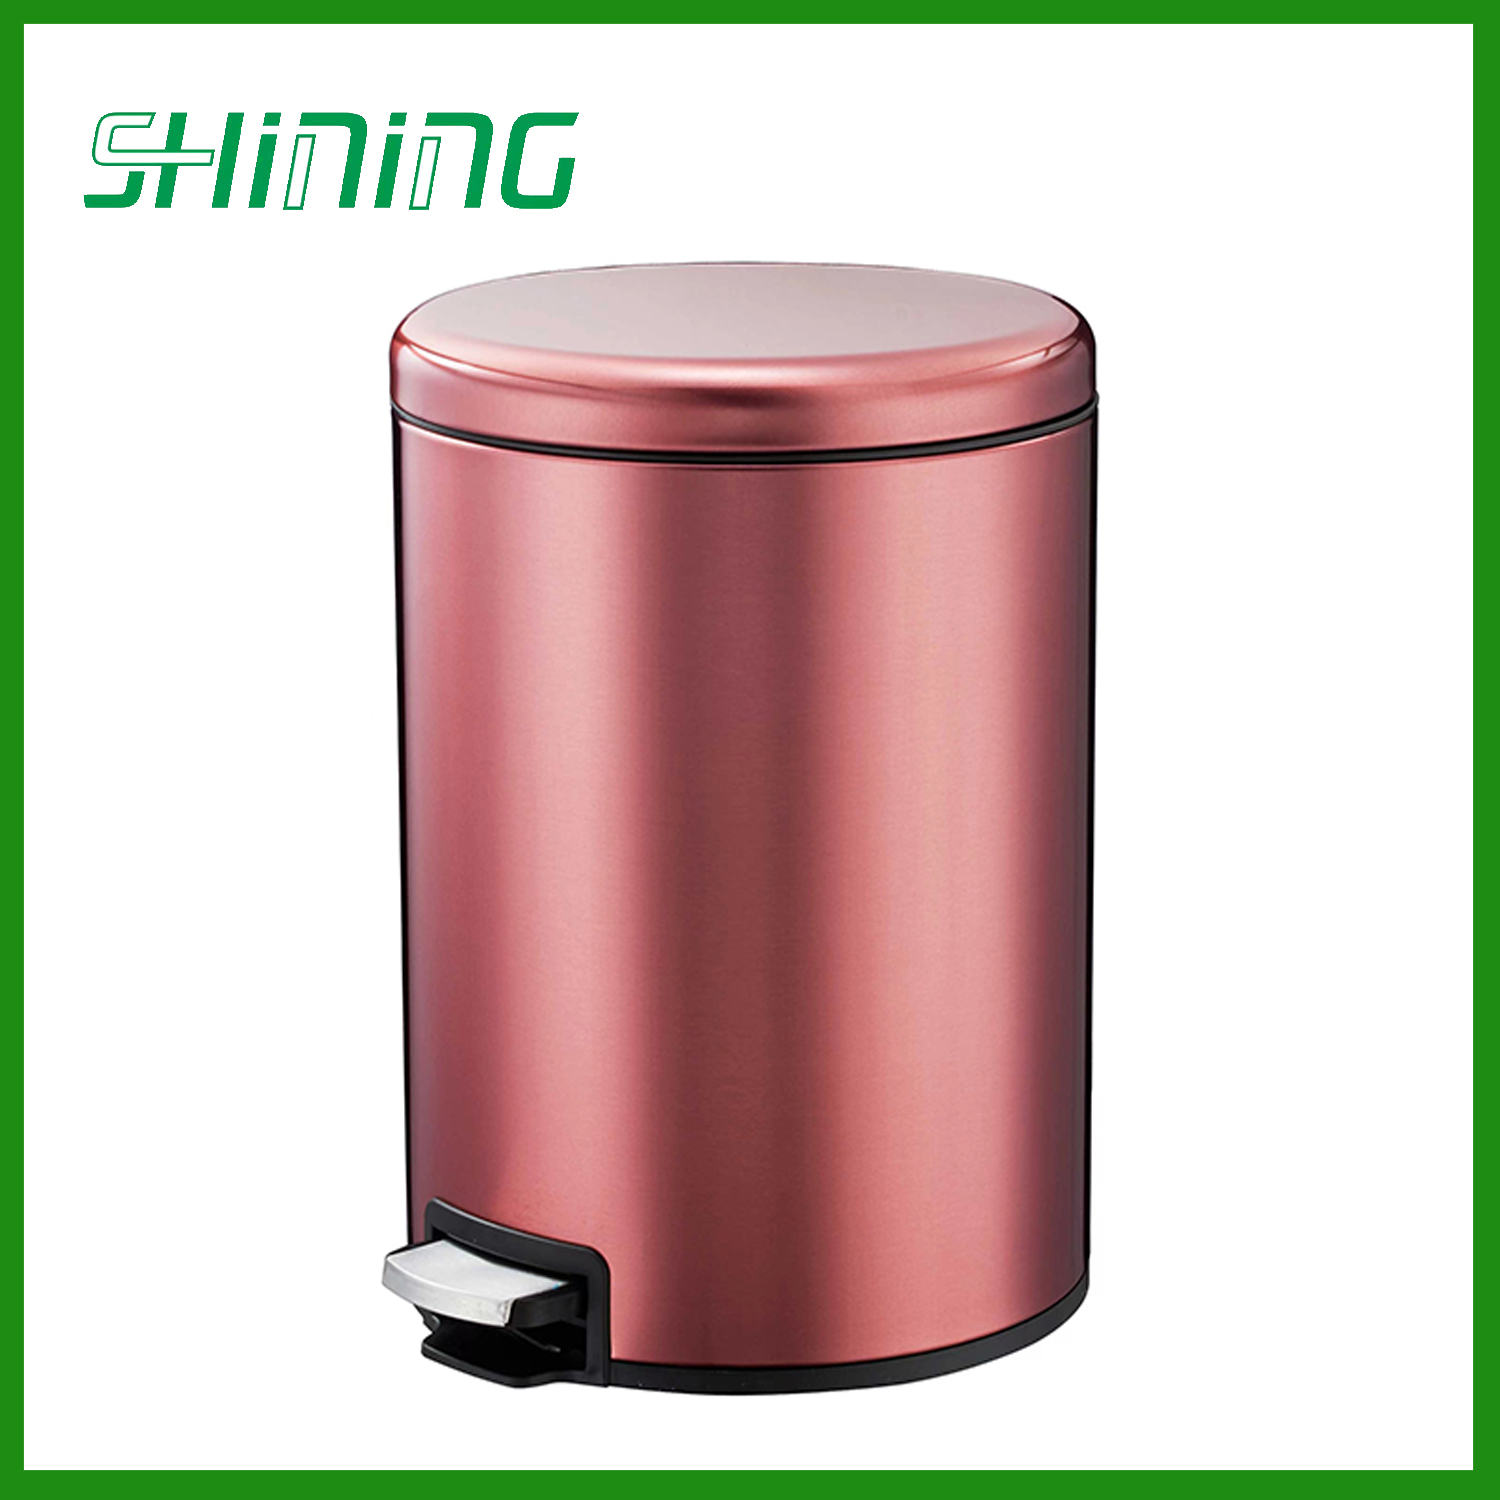  Foot pedal Waste Bin with soft close and anti-finger print (KL-122)